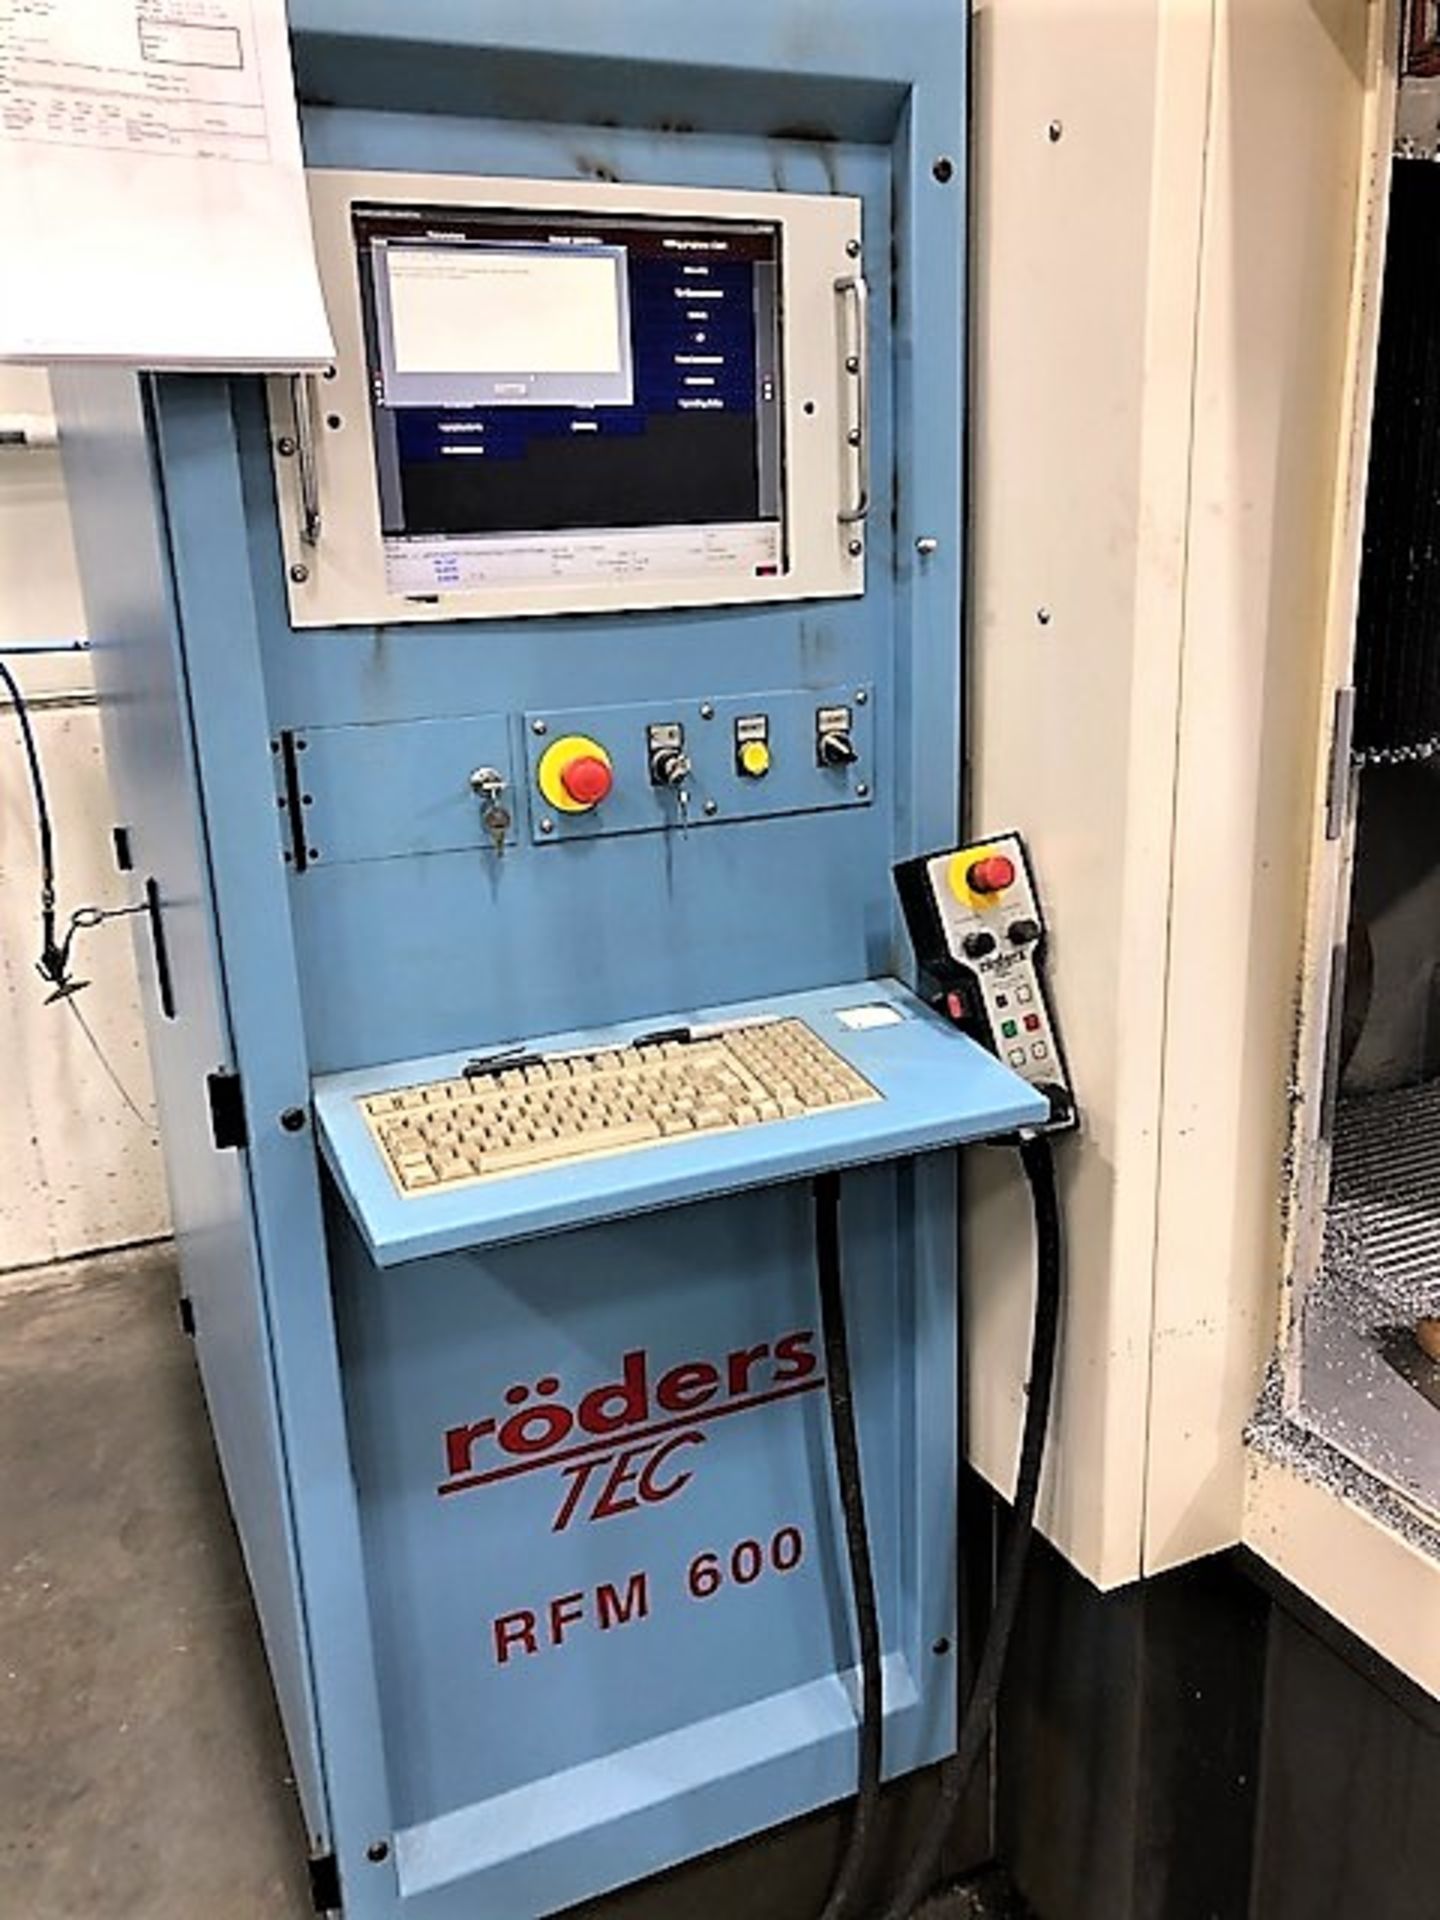 Roders TEC RFM 600 CNC 3-Axis High Speed Vertical Machining, New 2004 - Image 2 of 8